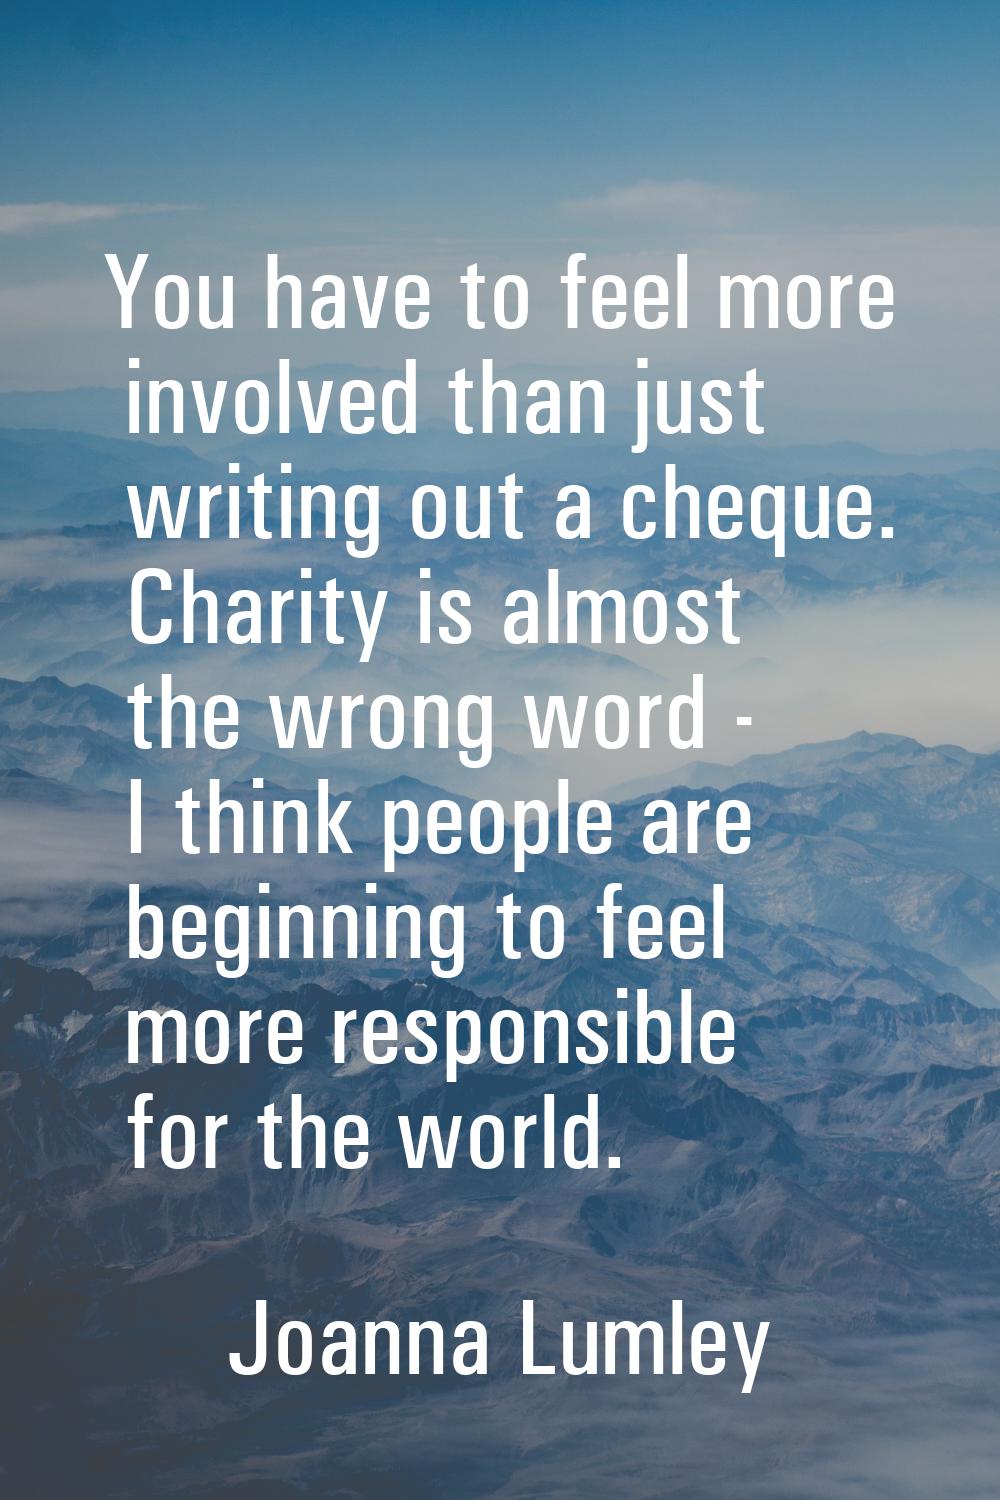 You have to feel more involved than just writing out a cheque. Charity is almost the wrong word - I